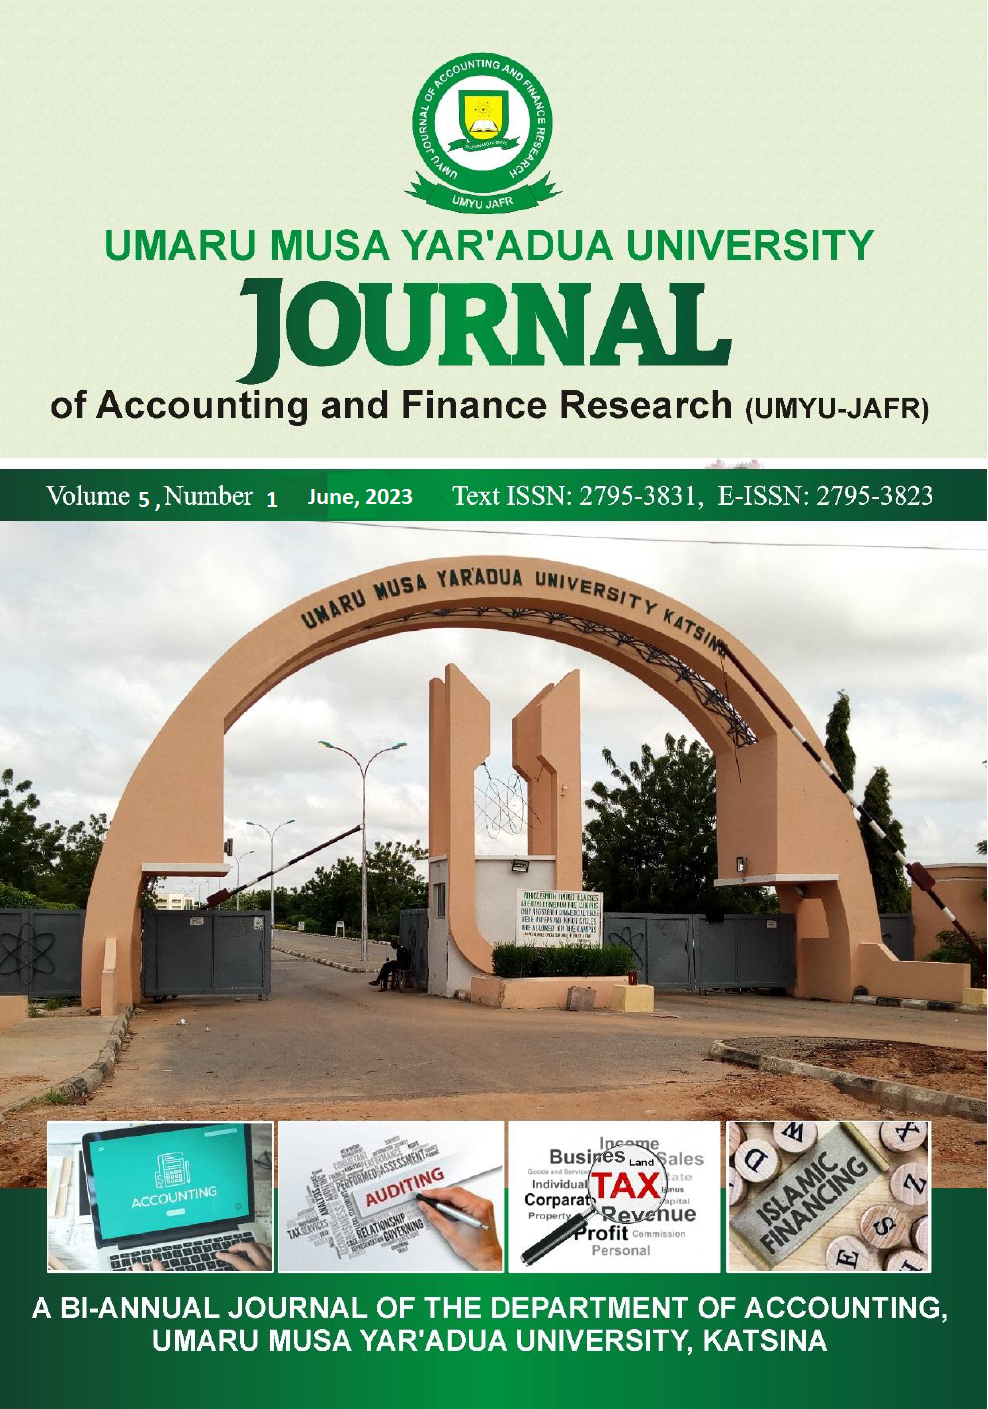 					View Vol. 5 No. 1 (2023): UMYU Journal of Accounting and Finance Research VOL. 5 NO. 1 June, 2023
				